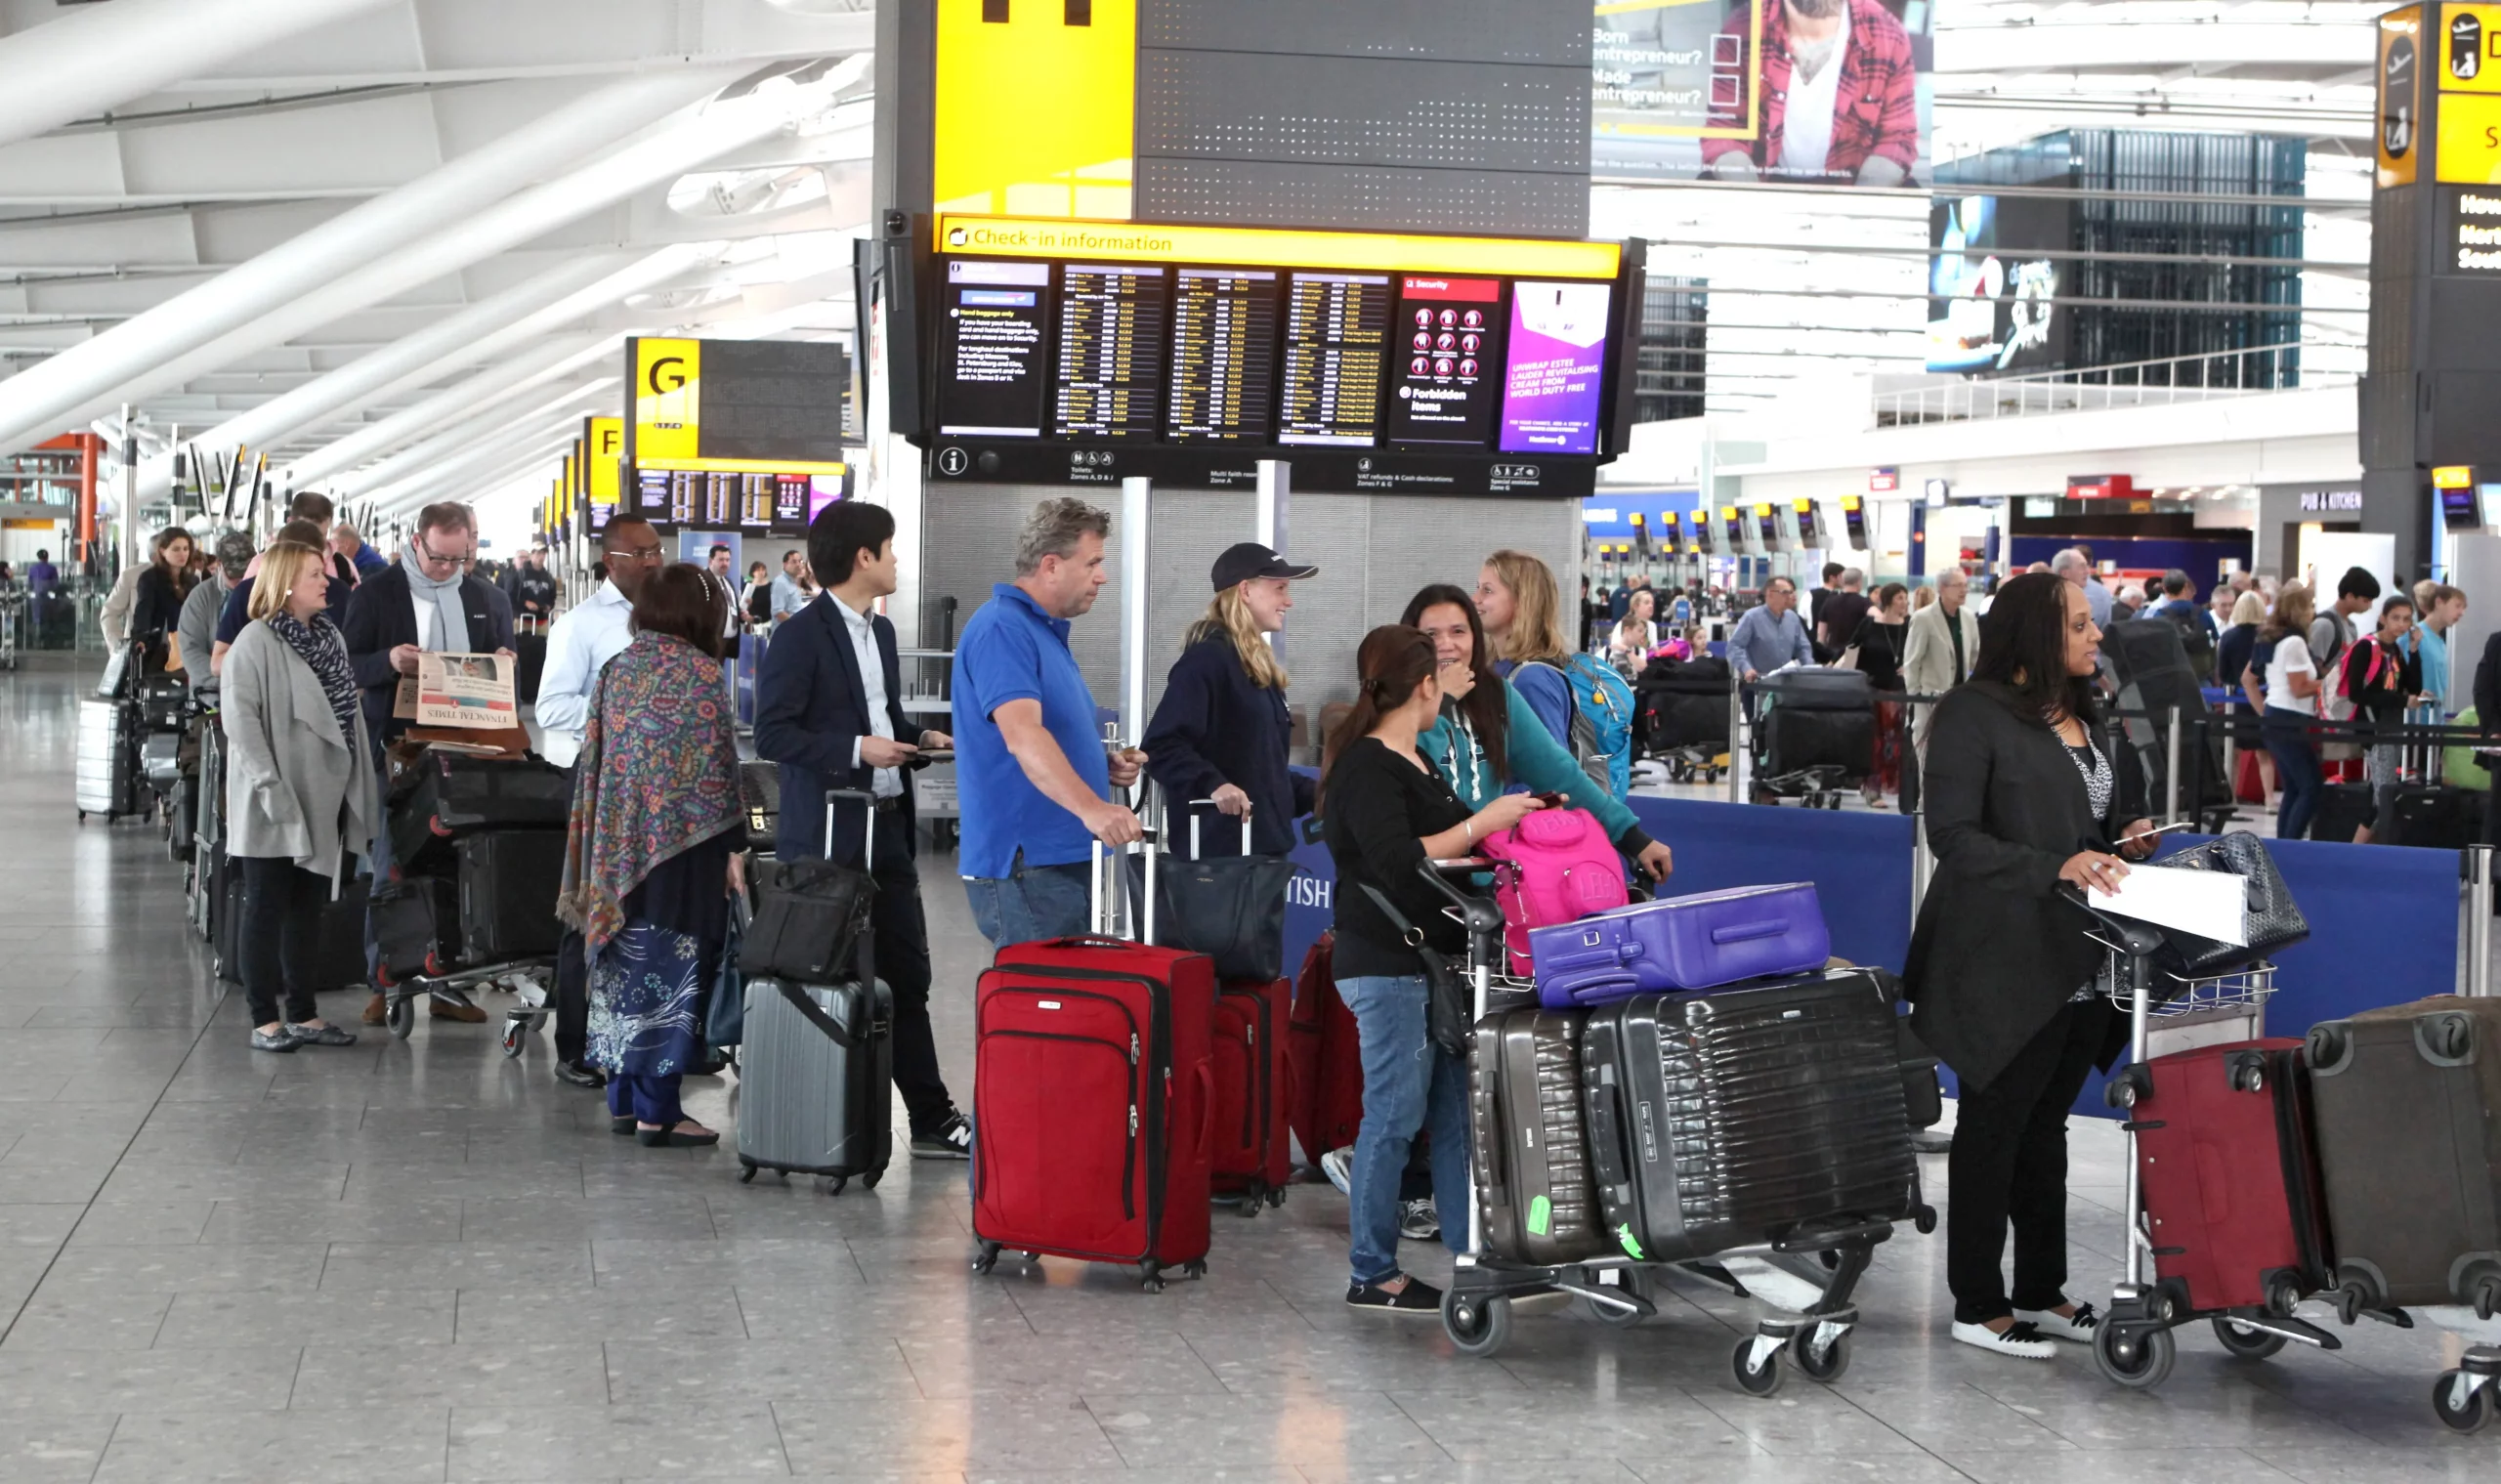 Check-in at Heathrow Airport